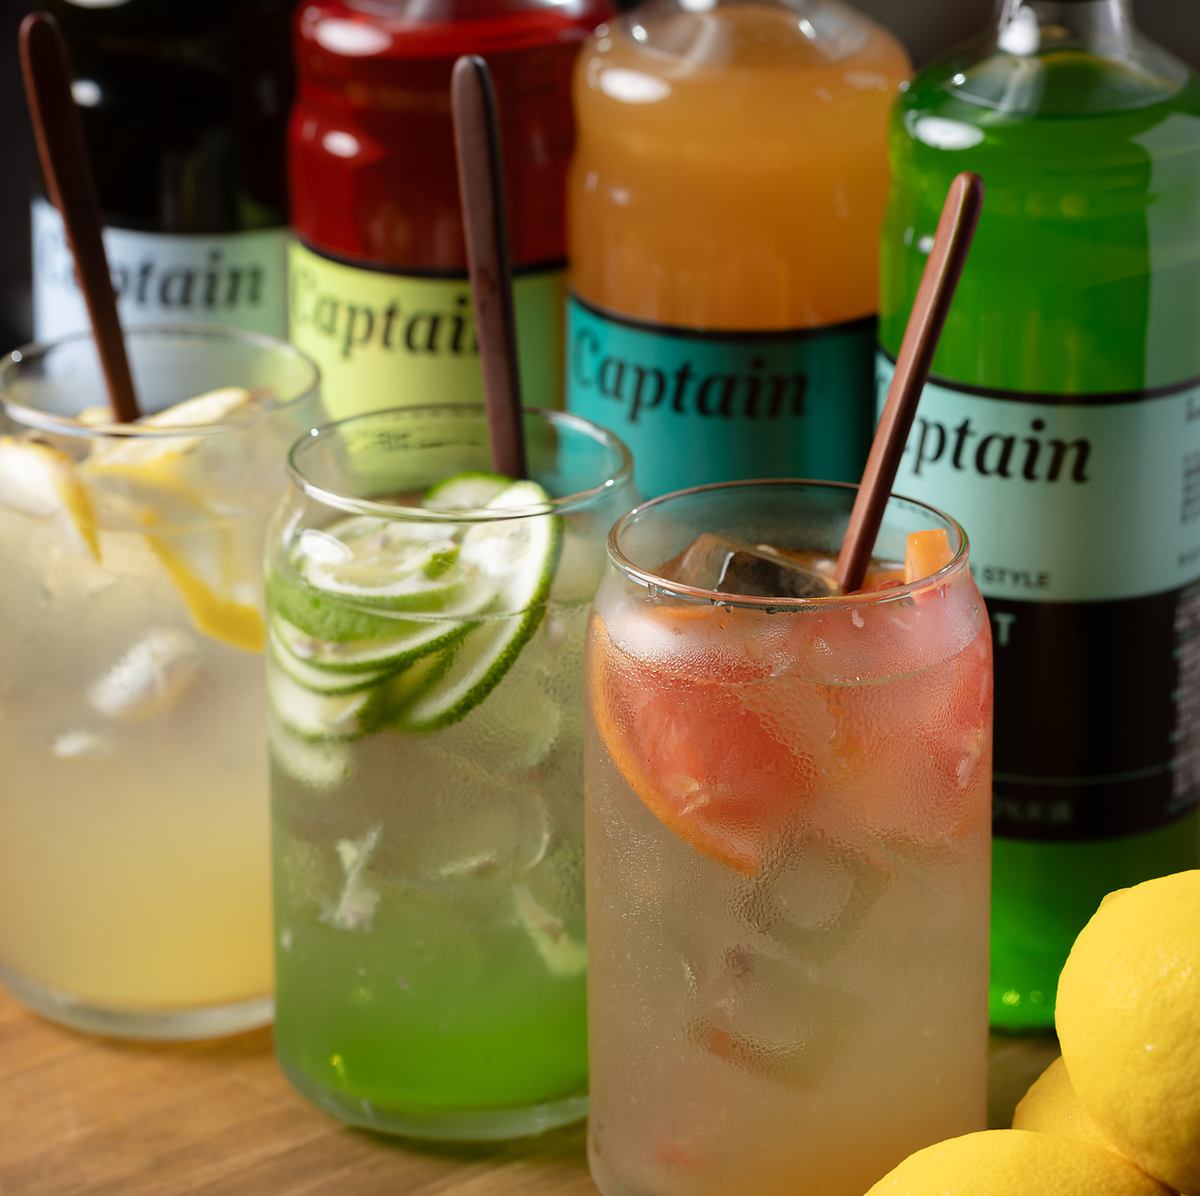 All-you-can-drink all-you-can-drink cocktails with over 200 types!